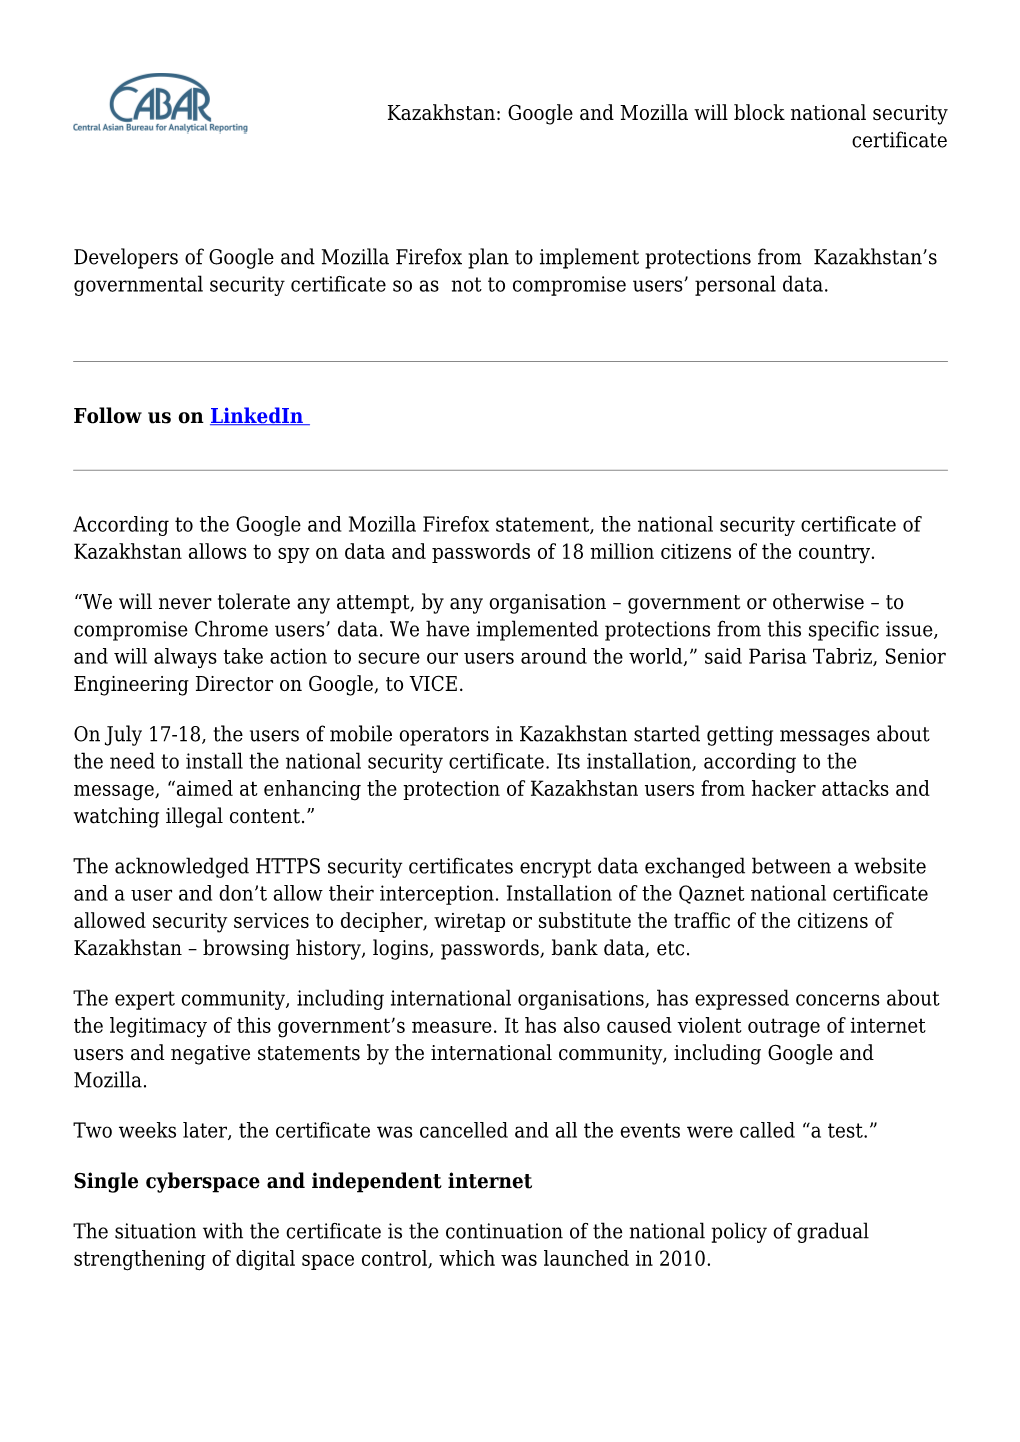 Kazakhstan: Google and Mozilla Will Block National Security Certificate